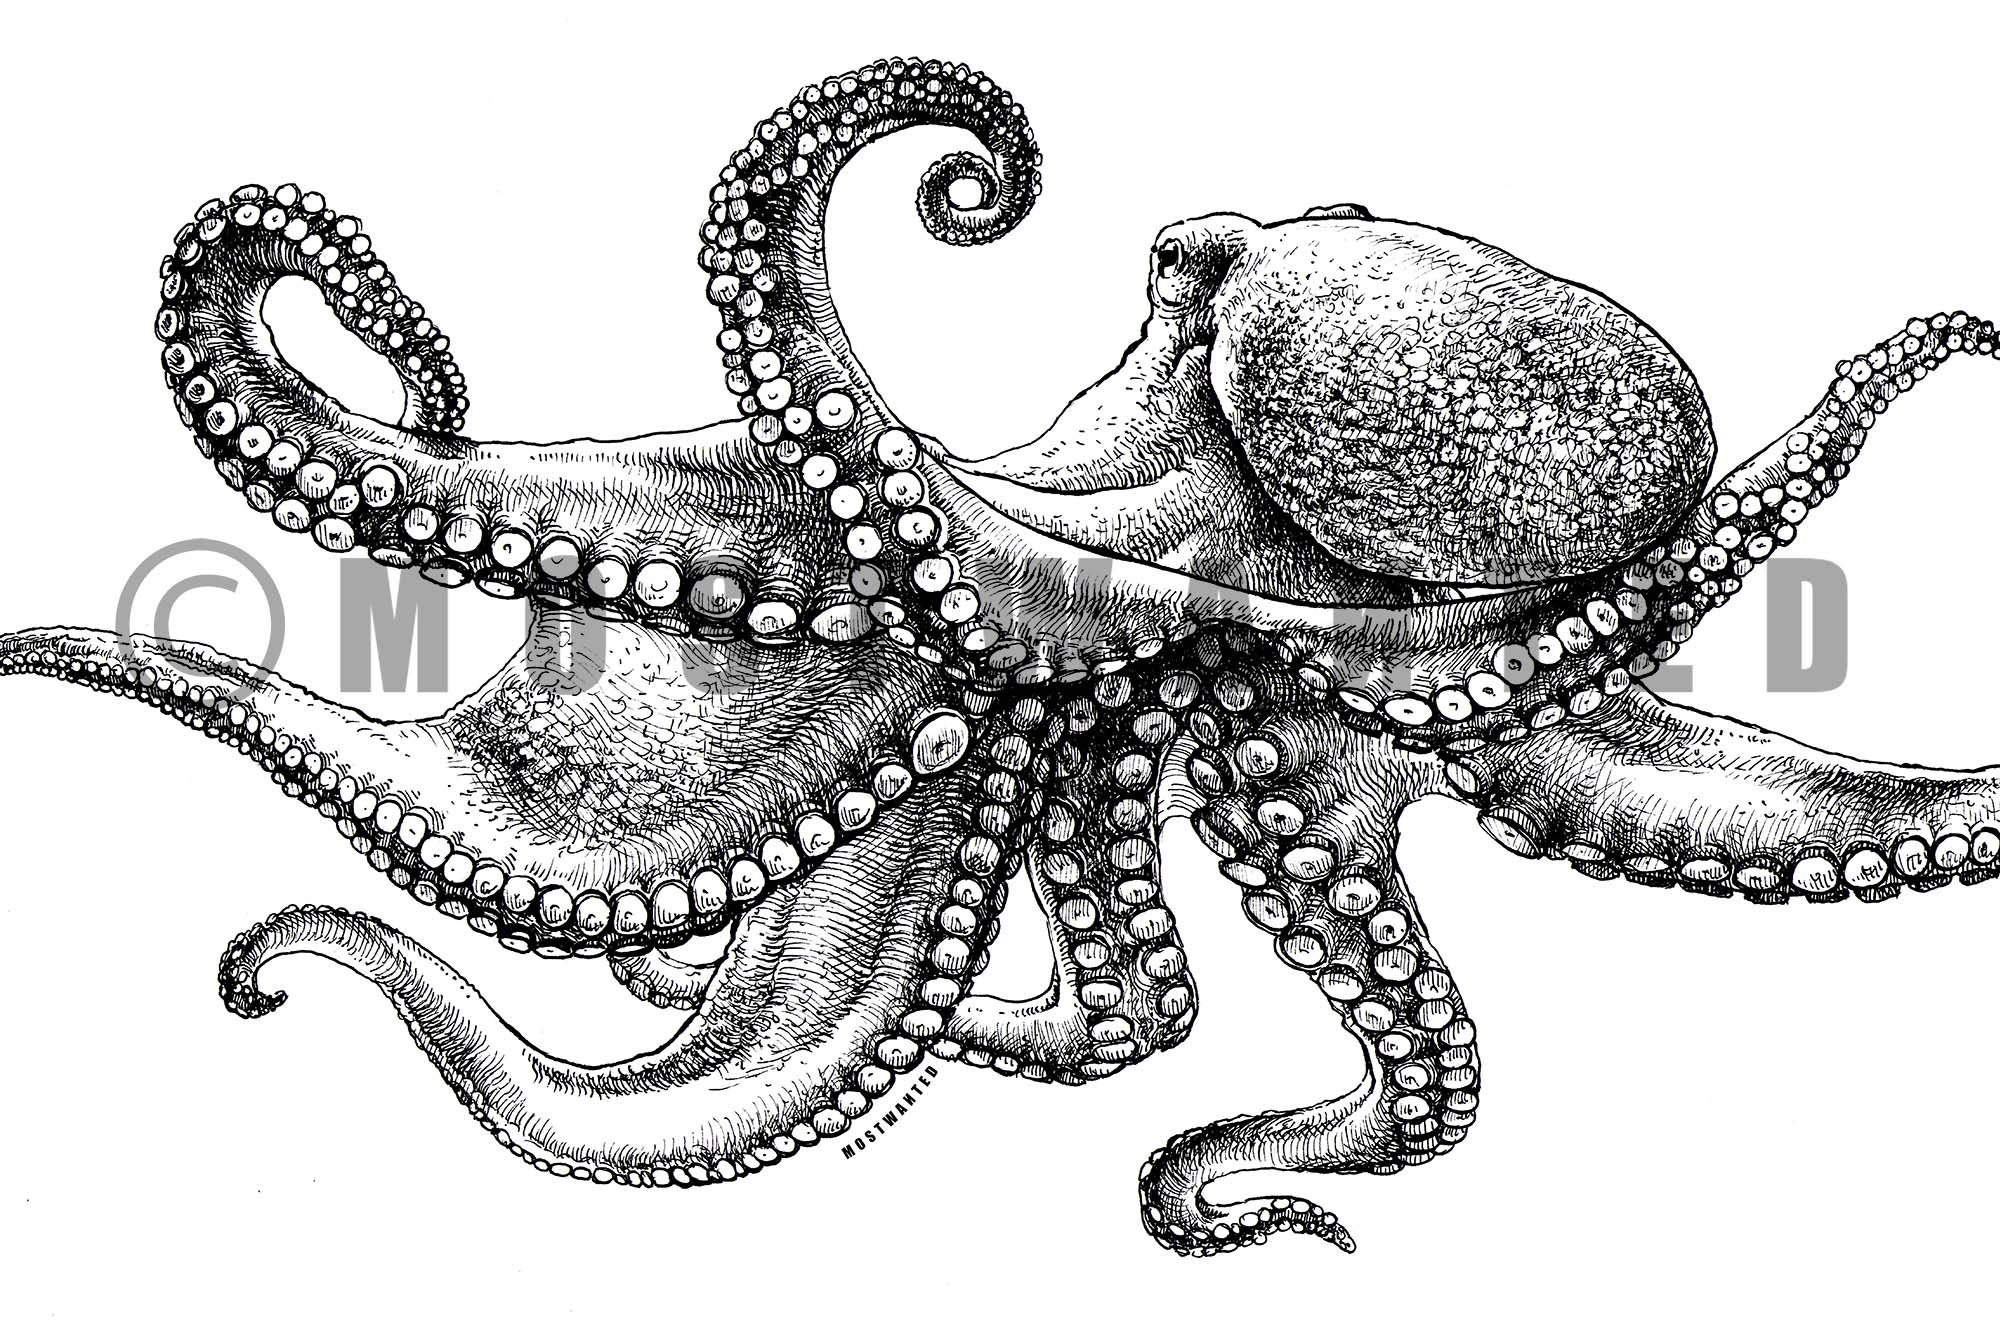 Realistic Black and White Octopus Tattoo Inspiration - wide 3